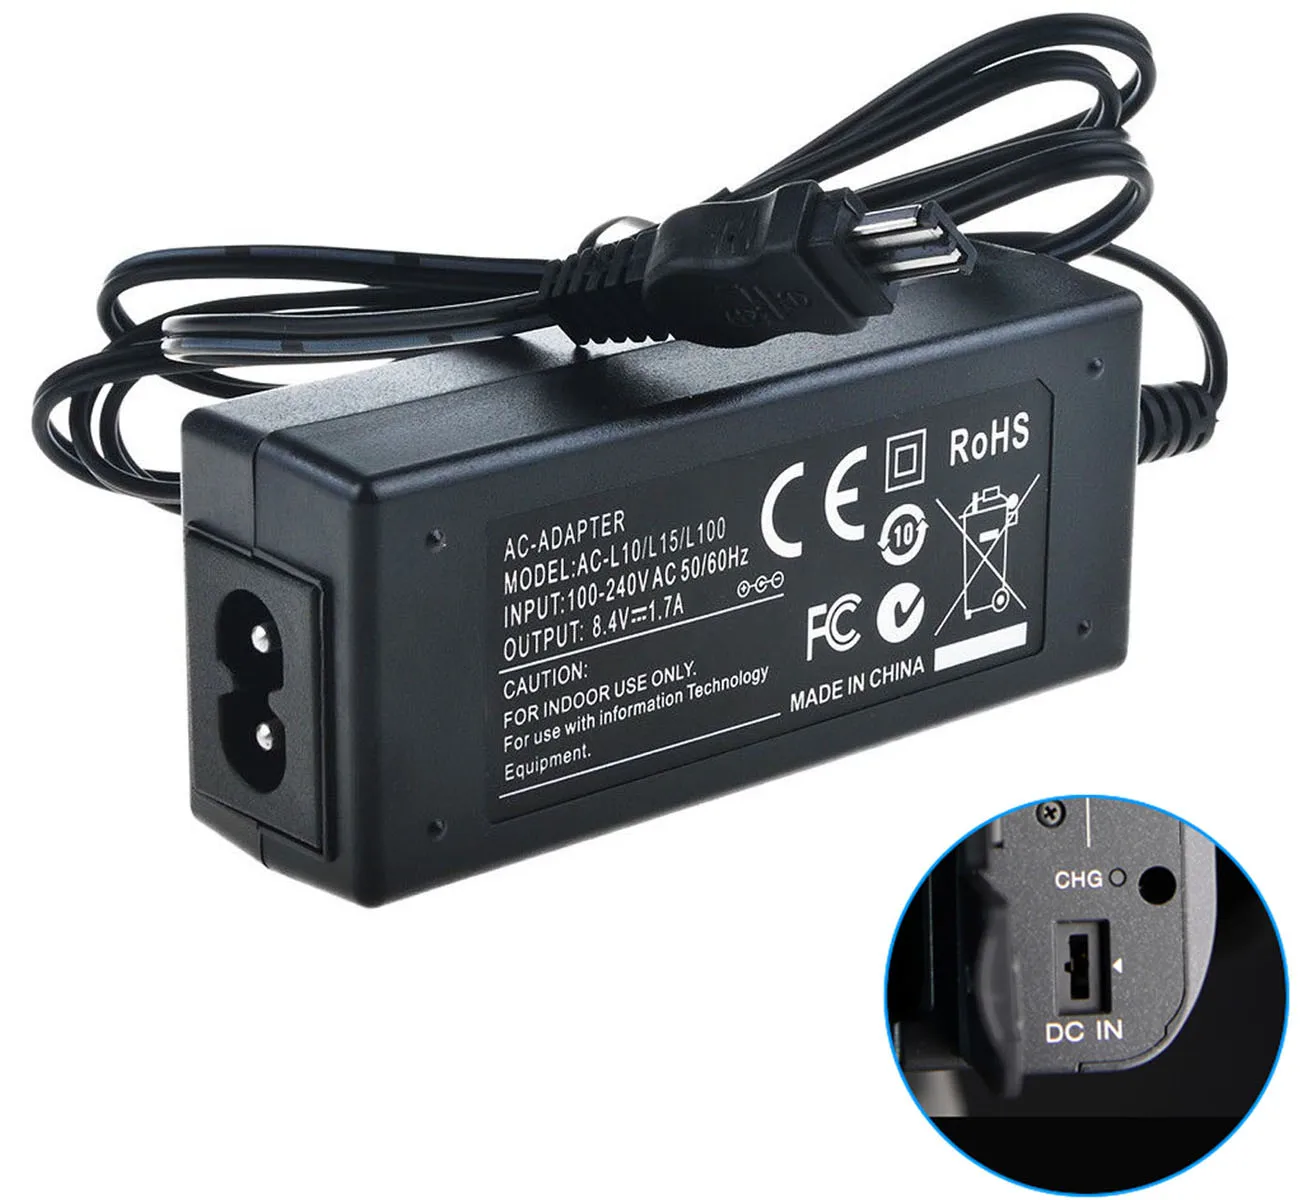 AC Power Adapter Charger for Sony HVR-A1 HVR-A1E HVR-HD1000 HVR-HD1000E HVR-HD1000P HVR-HD1000U HDV Camcorder | Электроника